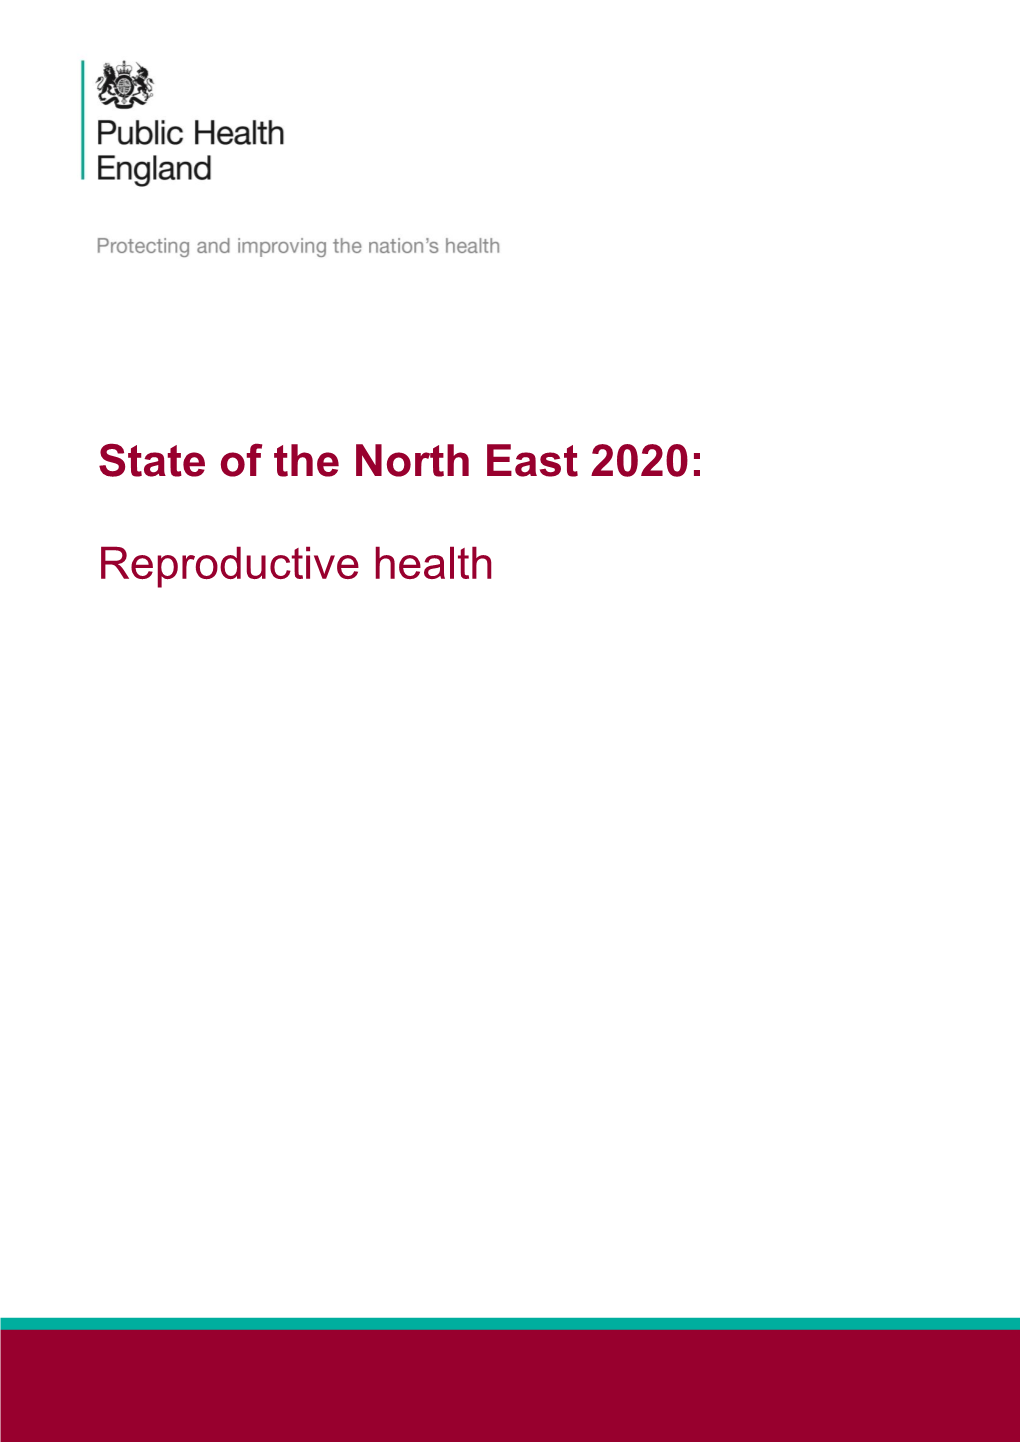 Reproductive Health in the North East: 2020